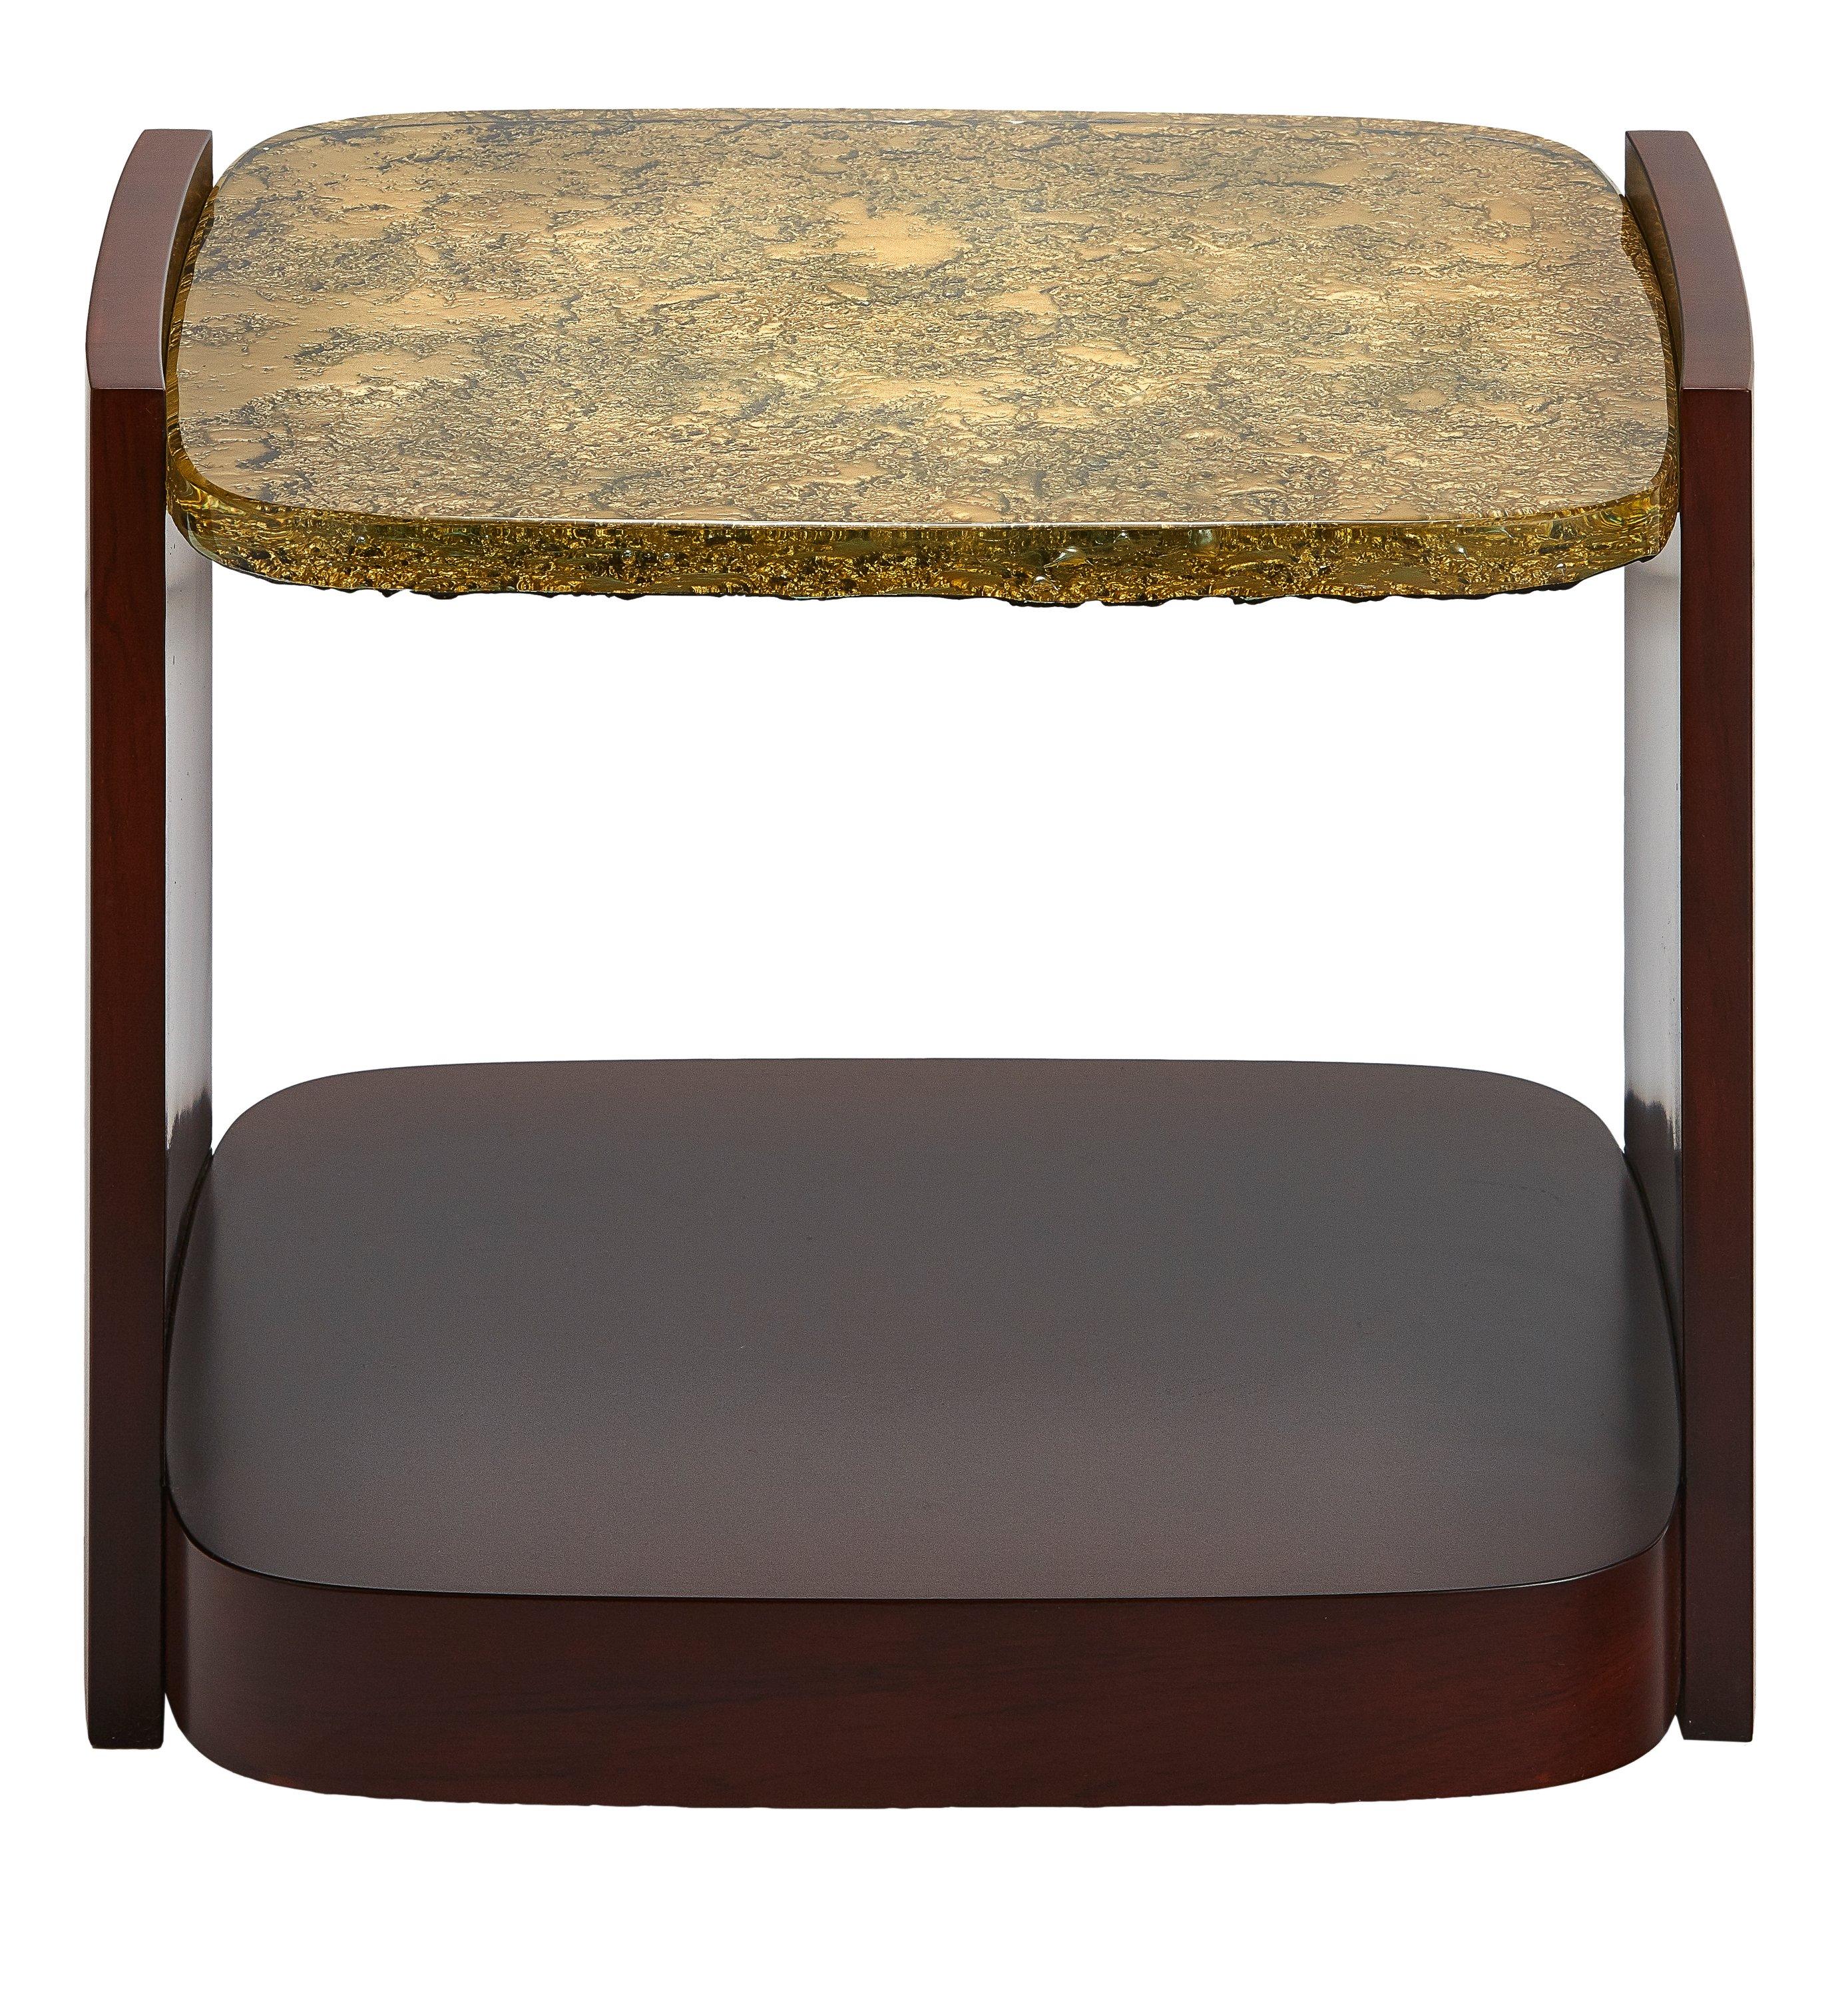 The modern/Art Deco rectangle-shaped table finished with dark Merbau wood veneer and 1” thick cast glass top in yellow tint. The back-side of the sculptured glass slab is metalized to expose the decorative texture, available now.
Glass with silver